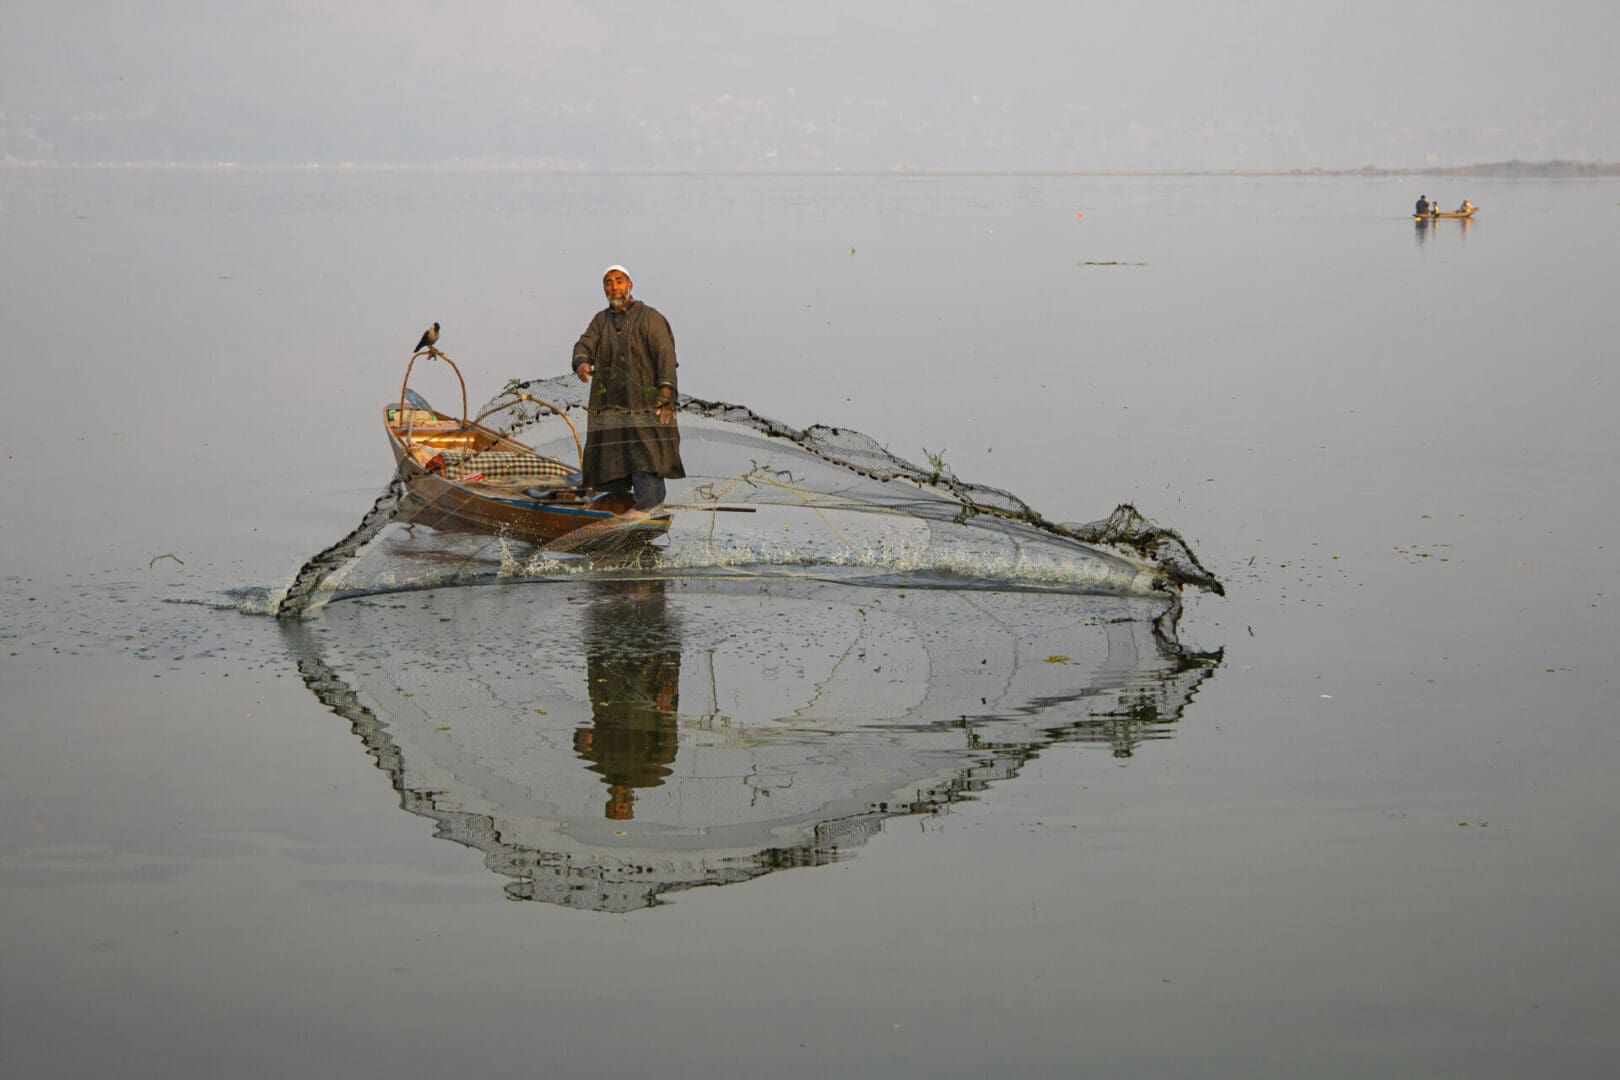 A man is fishing in a boat on a lake.